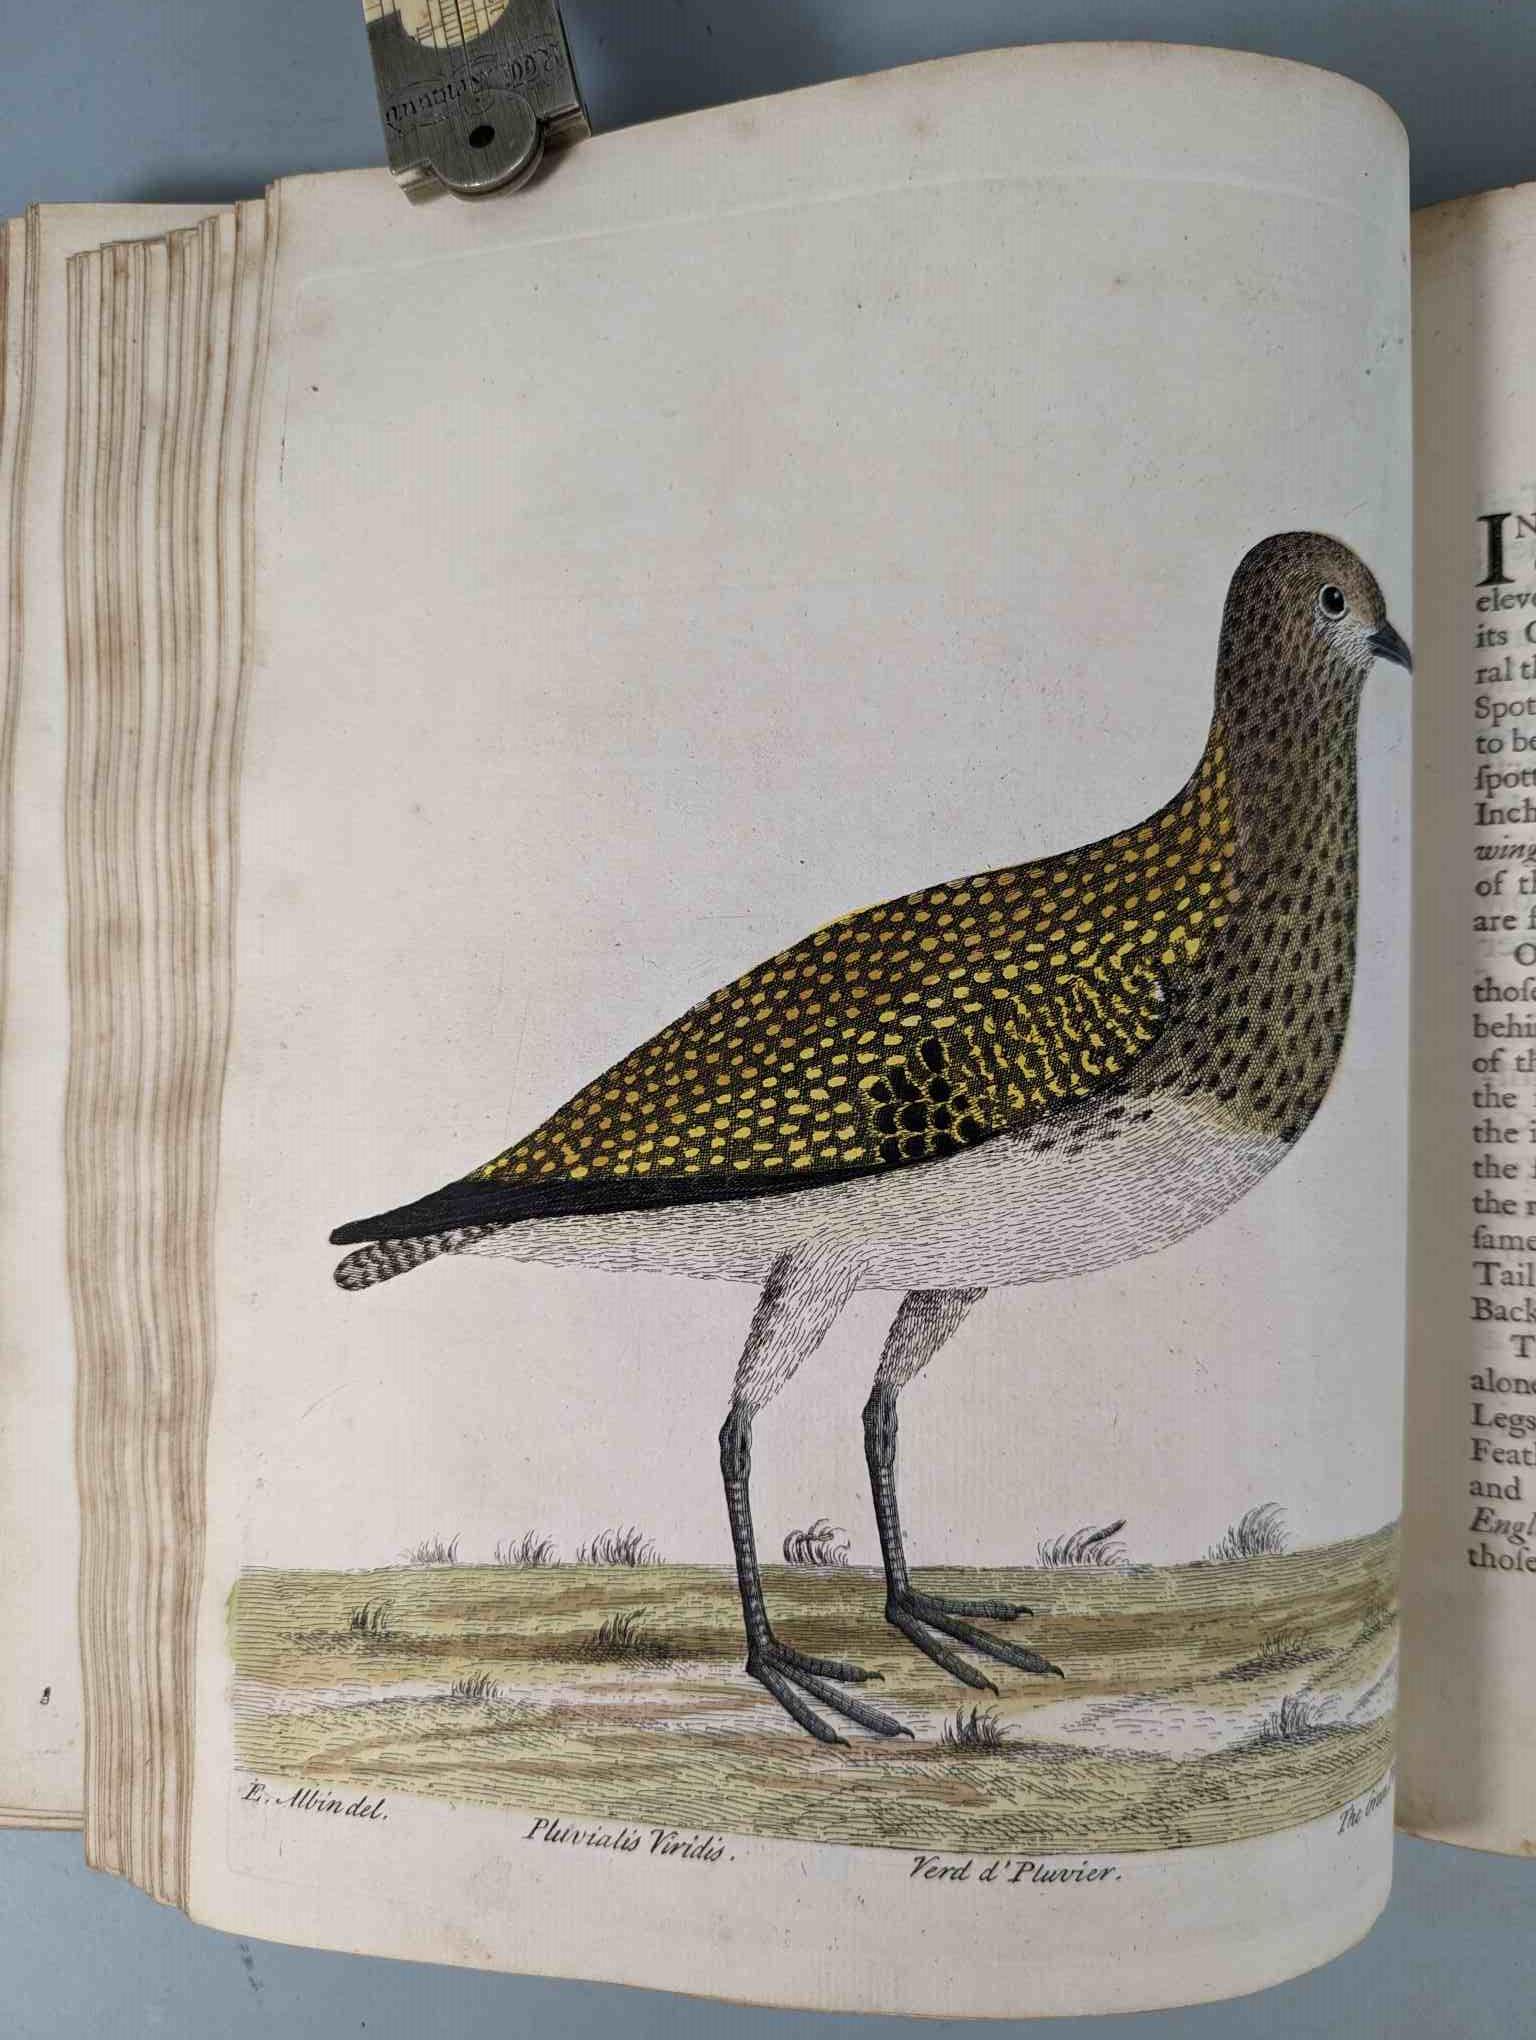 ALBIN, Eleazar. A Natural History of Birds, to which are added, Notes and Observations by W. - Image 78 of 208